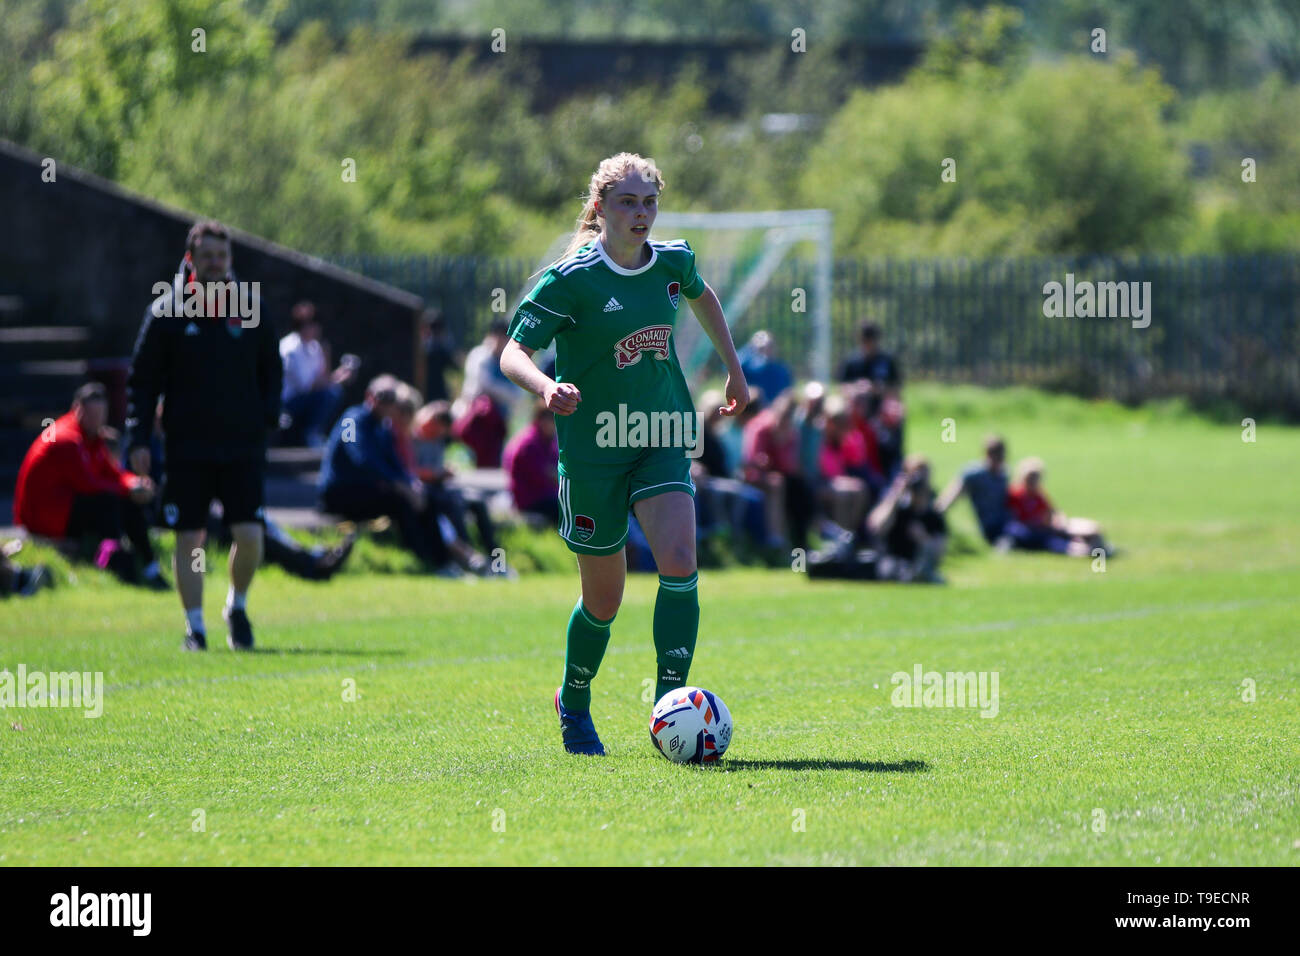 May 12th, 2019, Cork, Ireland - Zara Foley at the Women's National League  game: Cork City FC vs Galway WFC Stock Photo - Alamy